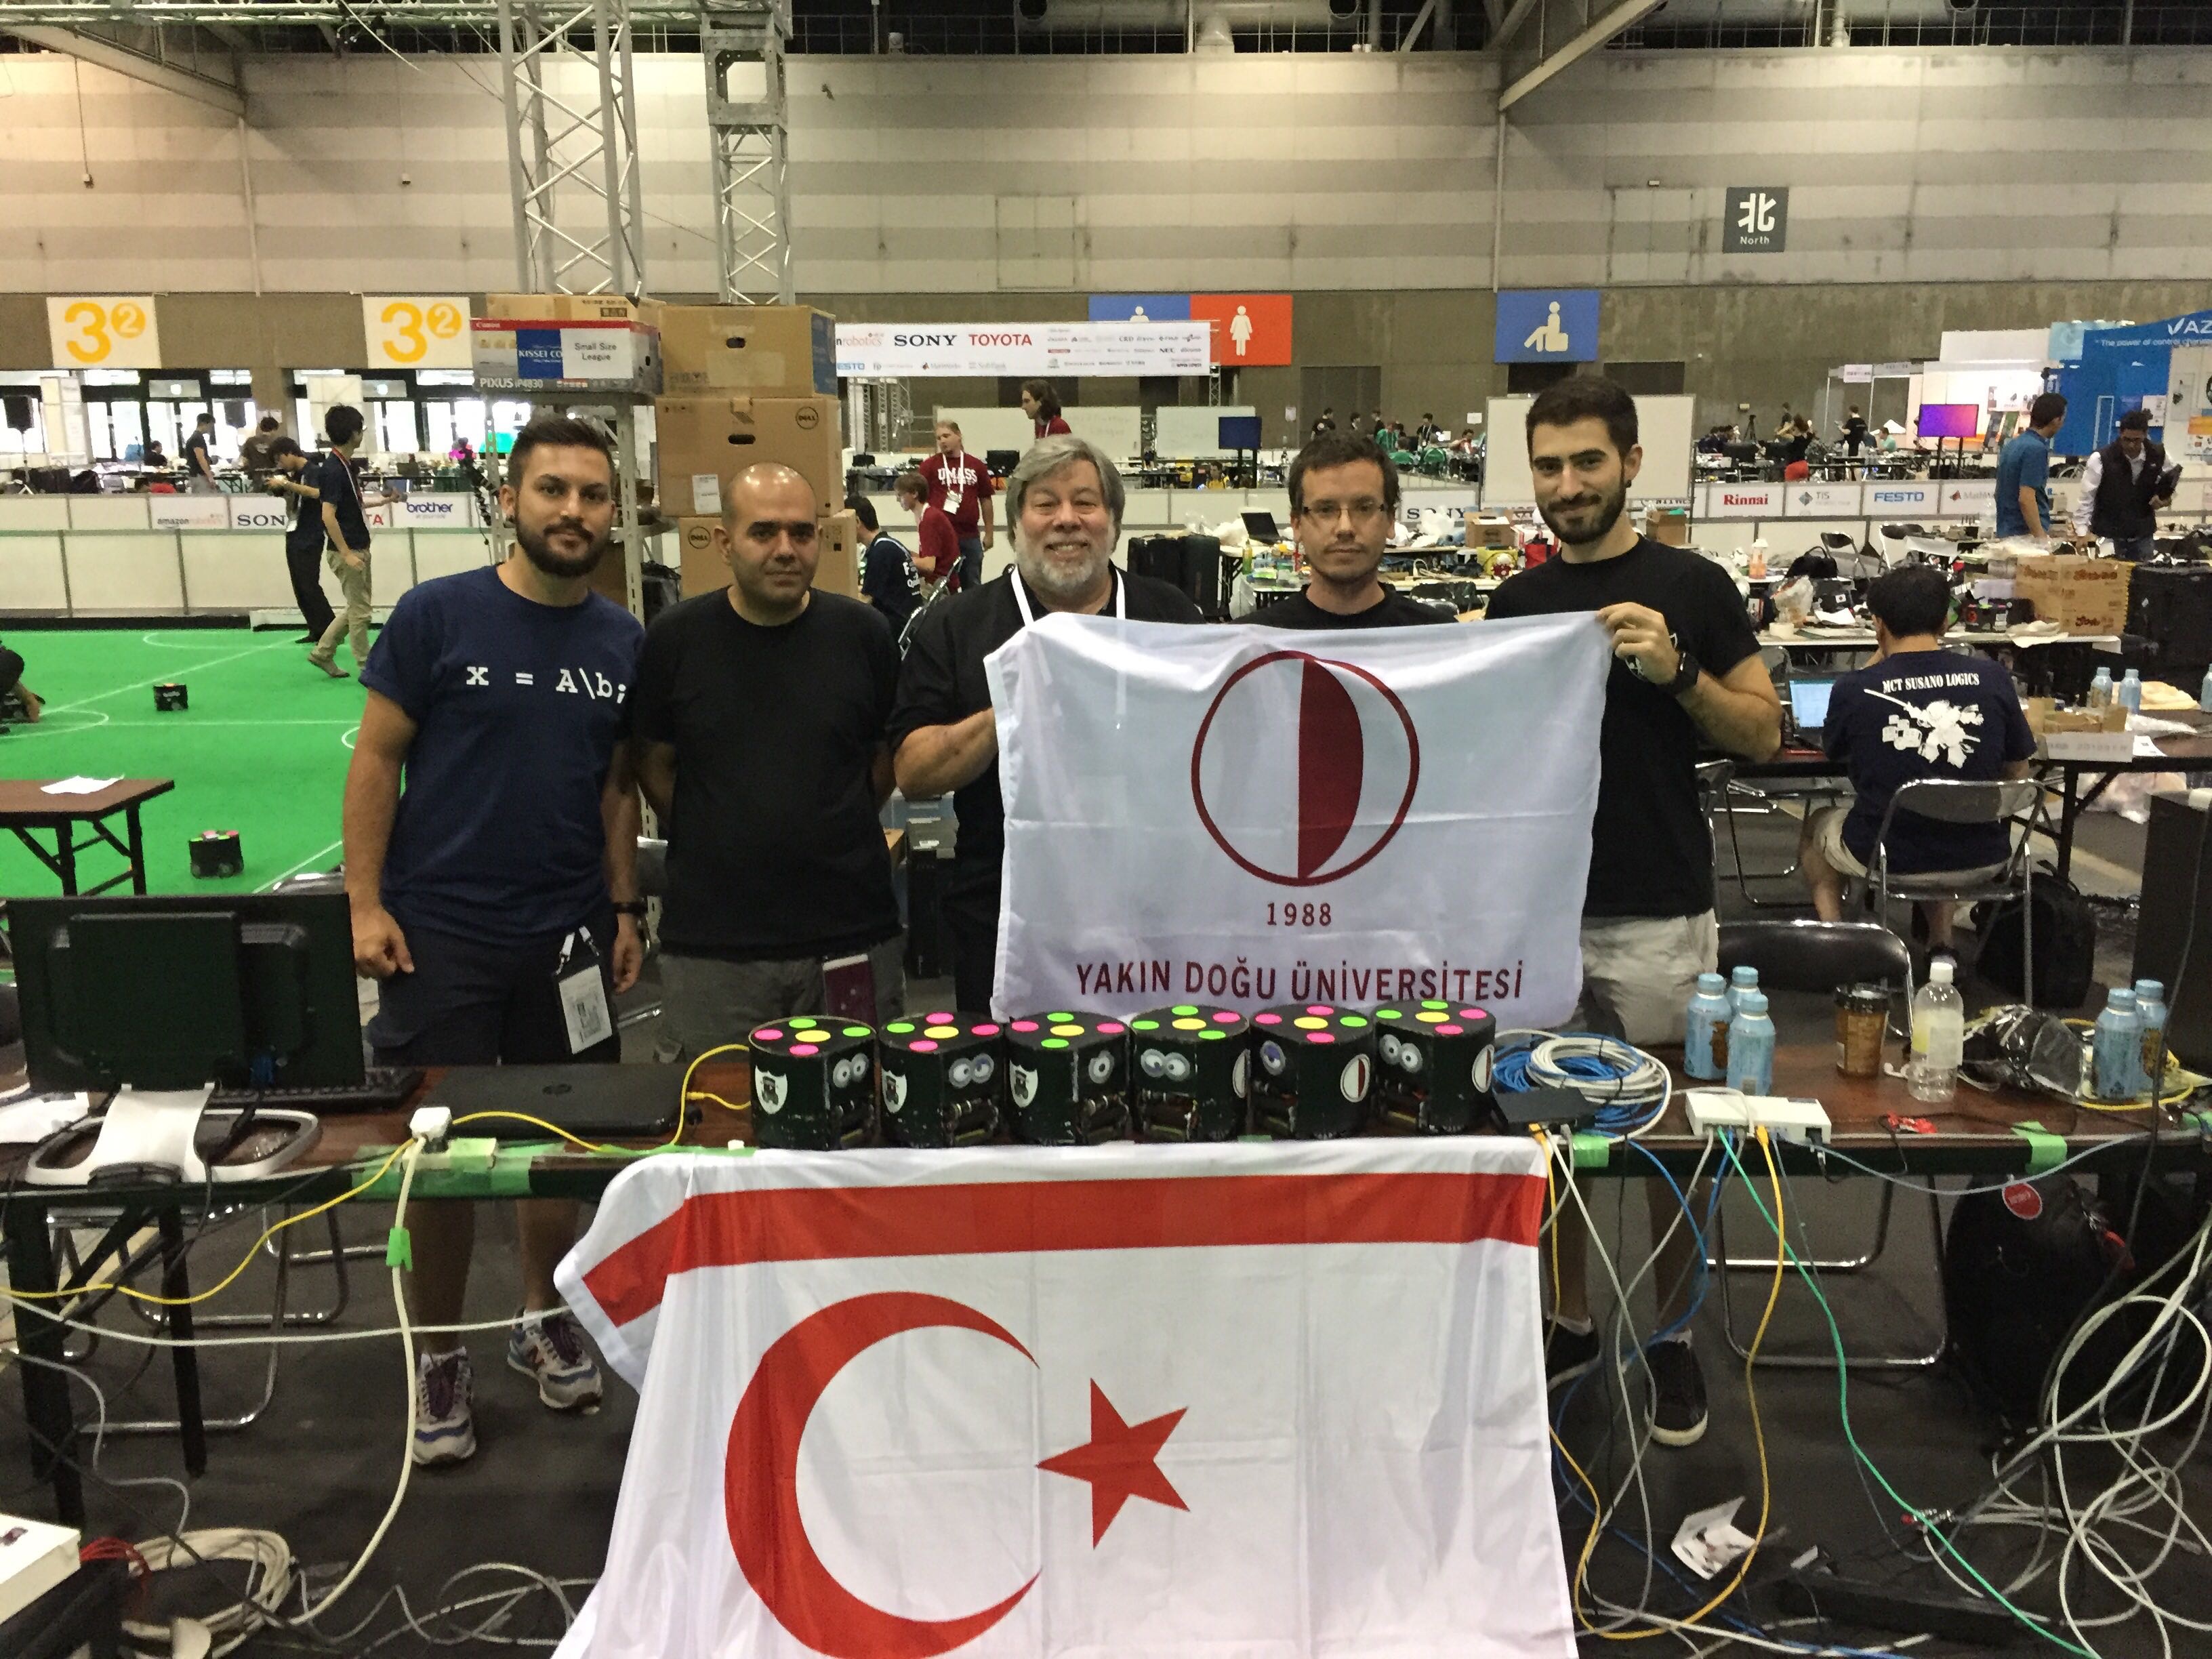 Steve Wozniak, Co-Founder of Apple Inc, showed great interest in the robotic soccer team NEUIslanders competing in Robot Soccer World Cup (RoboCup) 2017